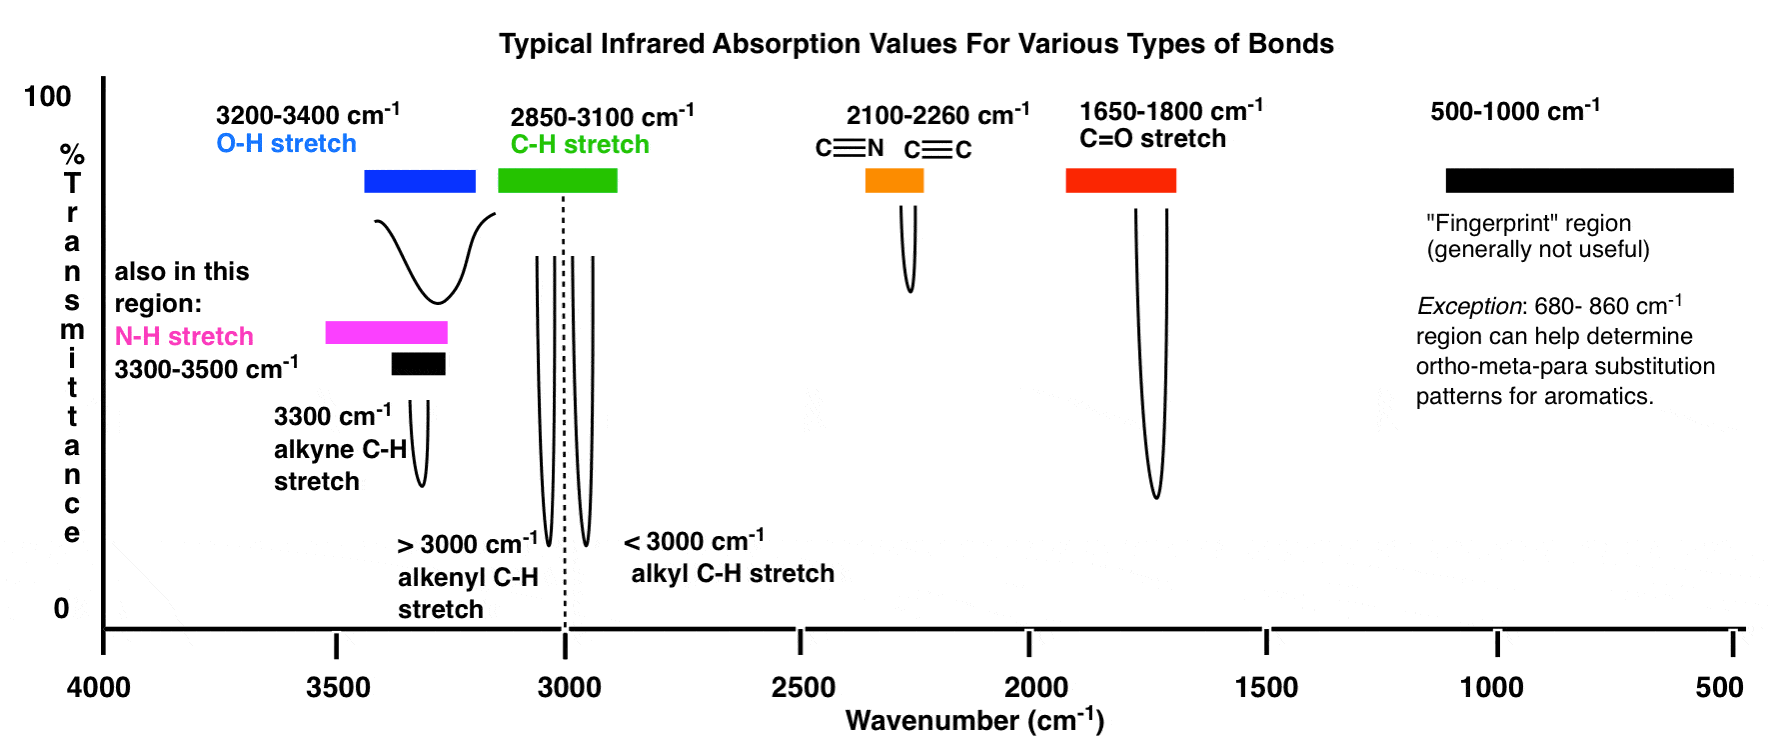 table of typical infrared absorption values for various types of bonds